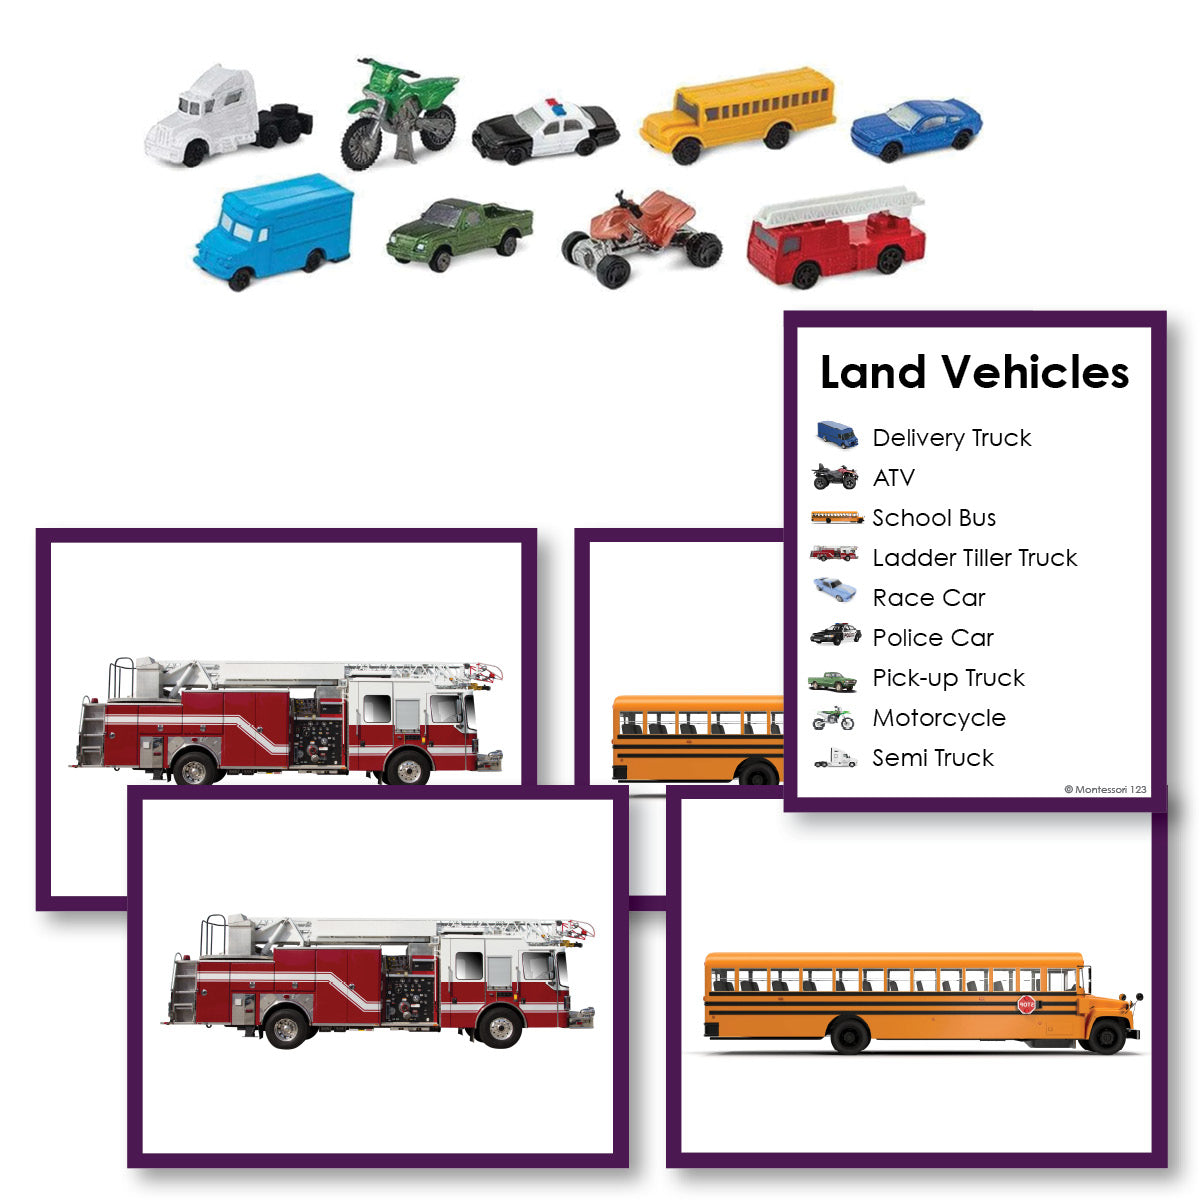 Land Vehicles Toddler Cards with Objects